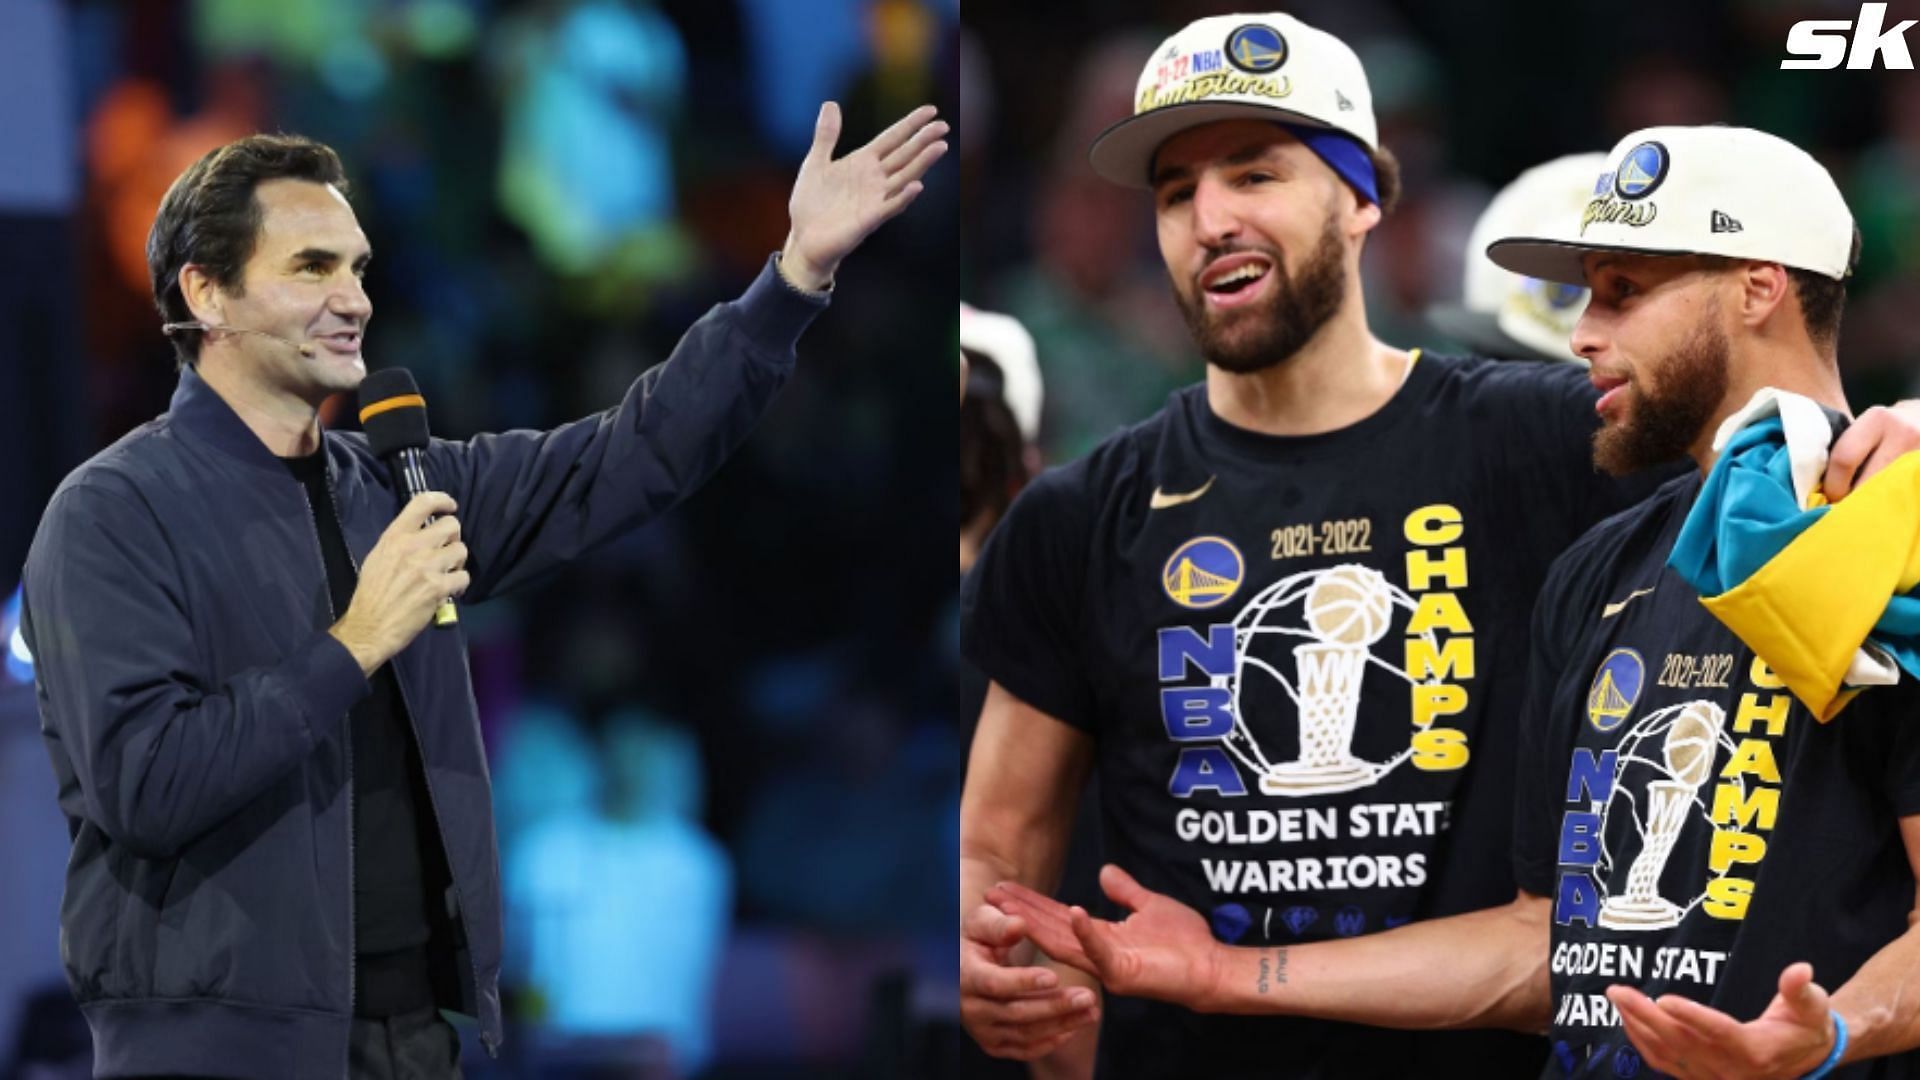 Roger Federer (left) and Stephen Curry &amp; Klay Thompson (right) 